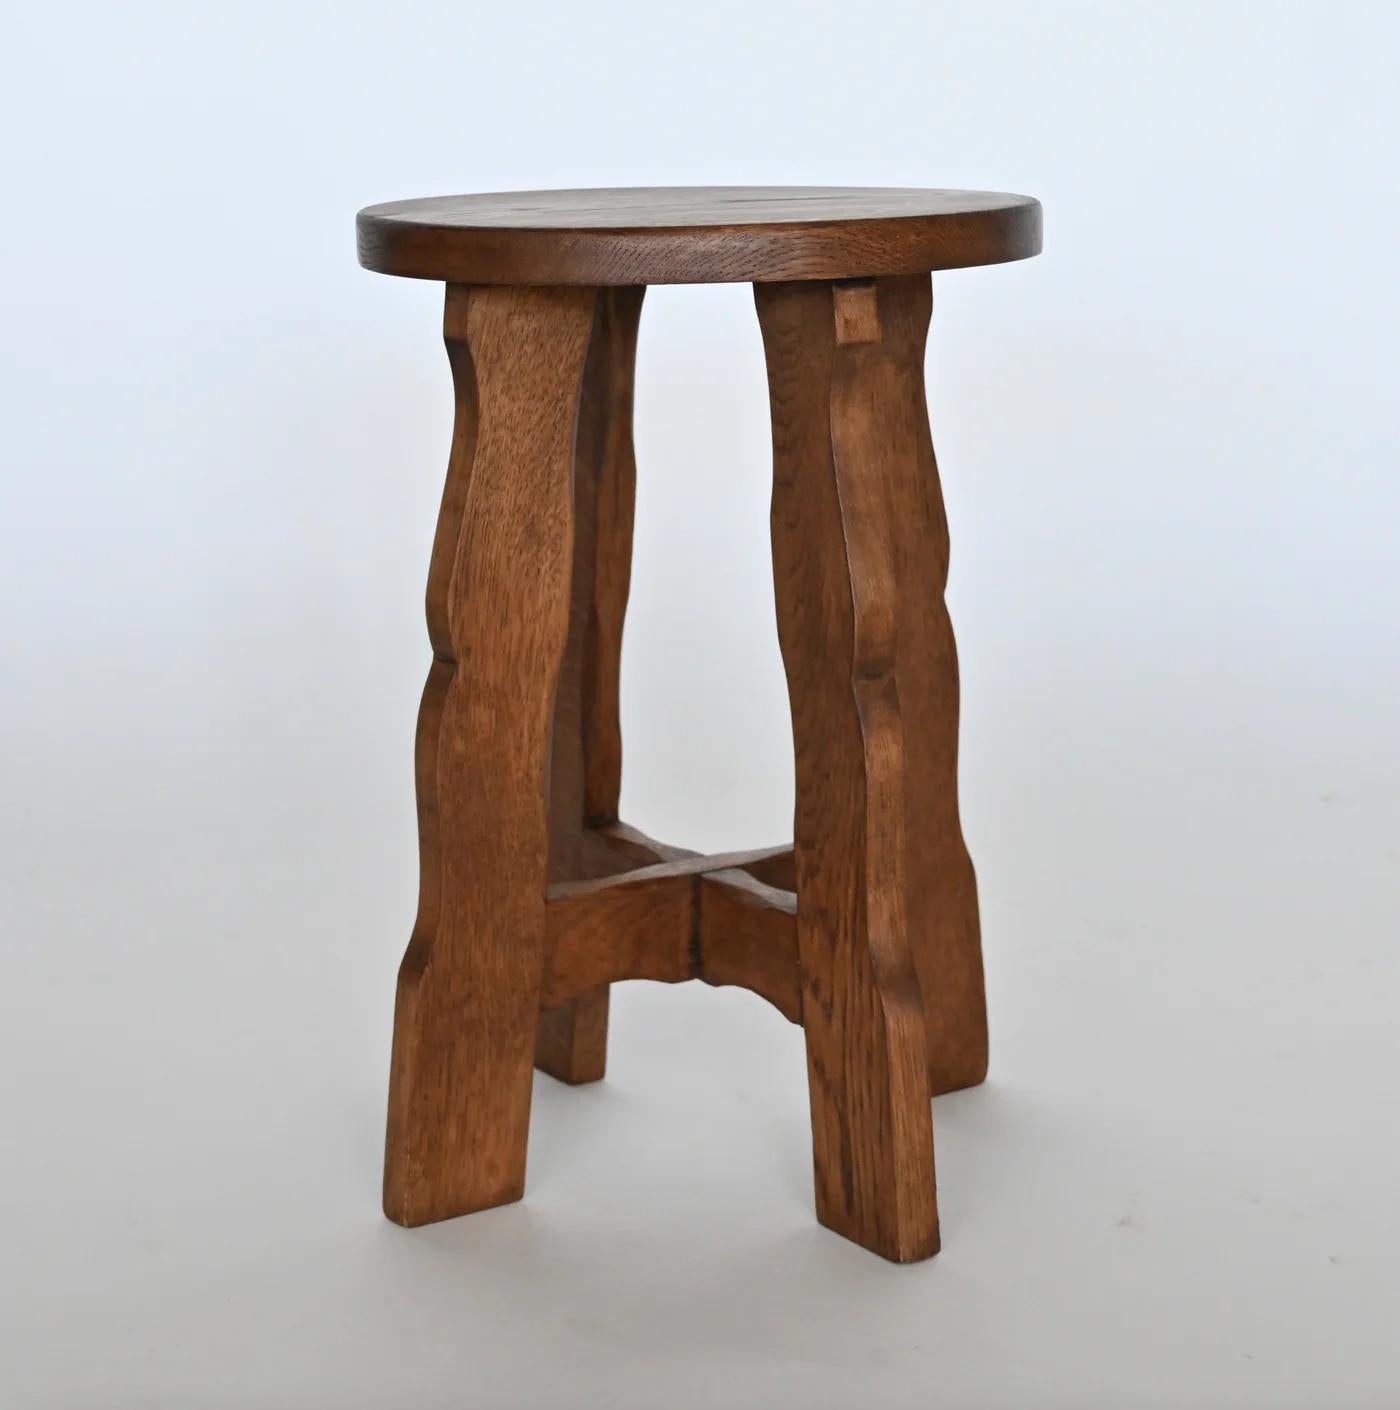 Solid wood side table / stool. France, early 20th century